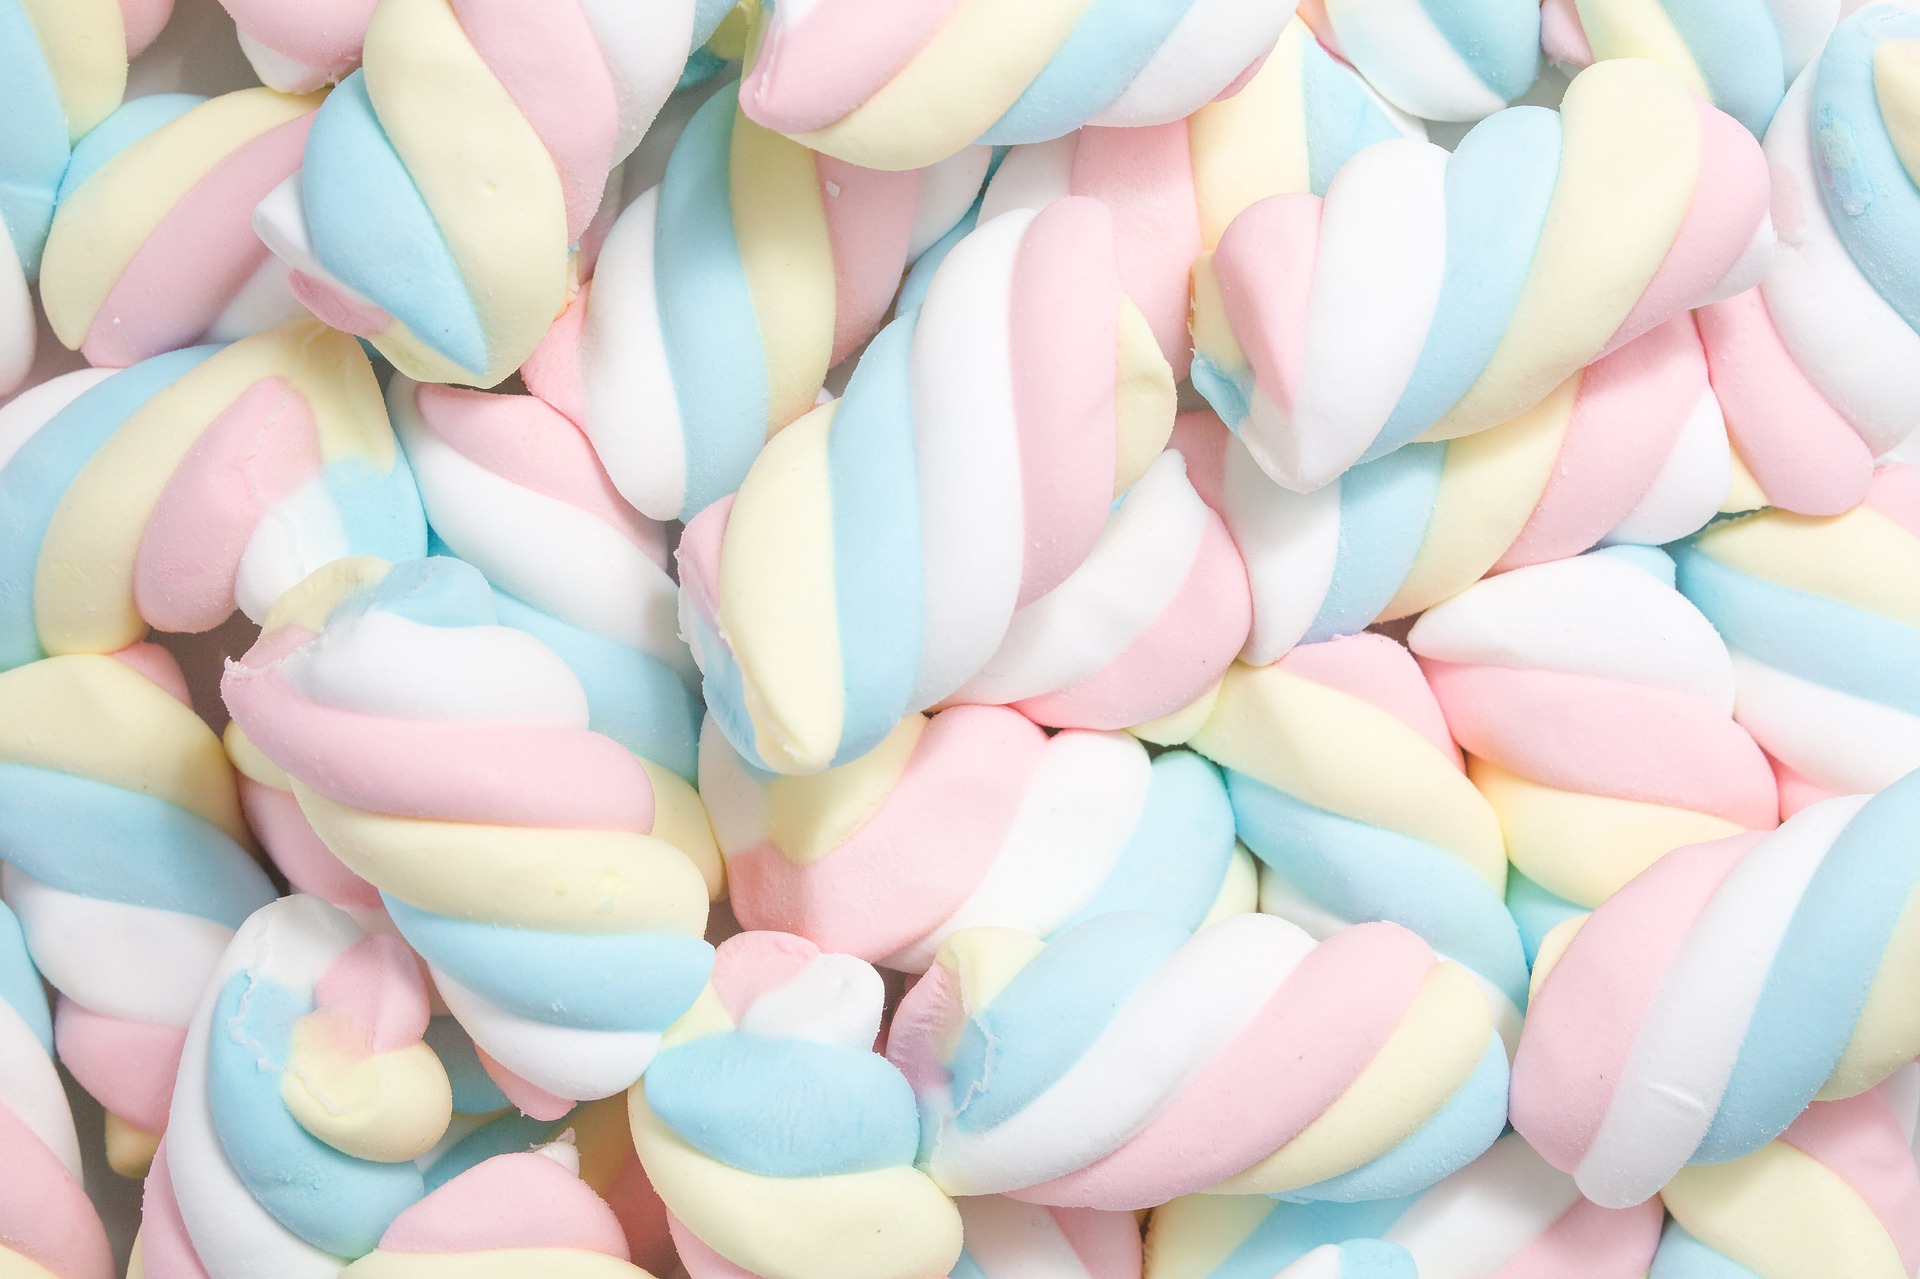 Marshmallow sweets